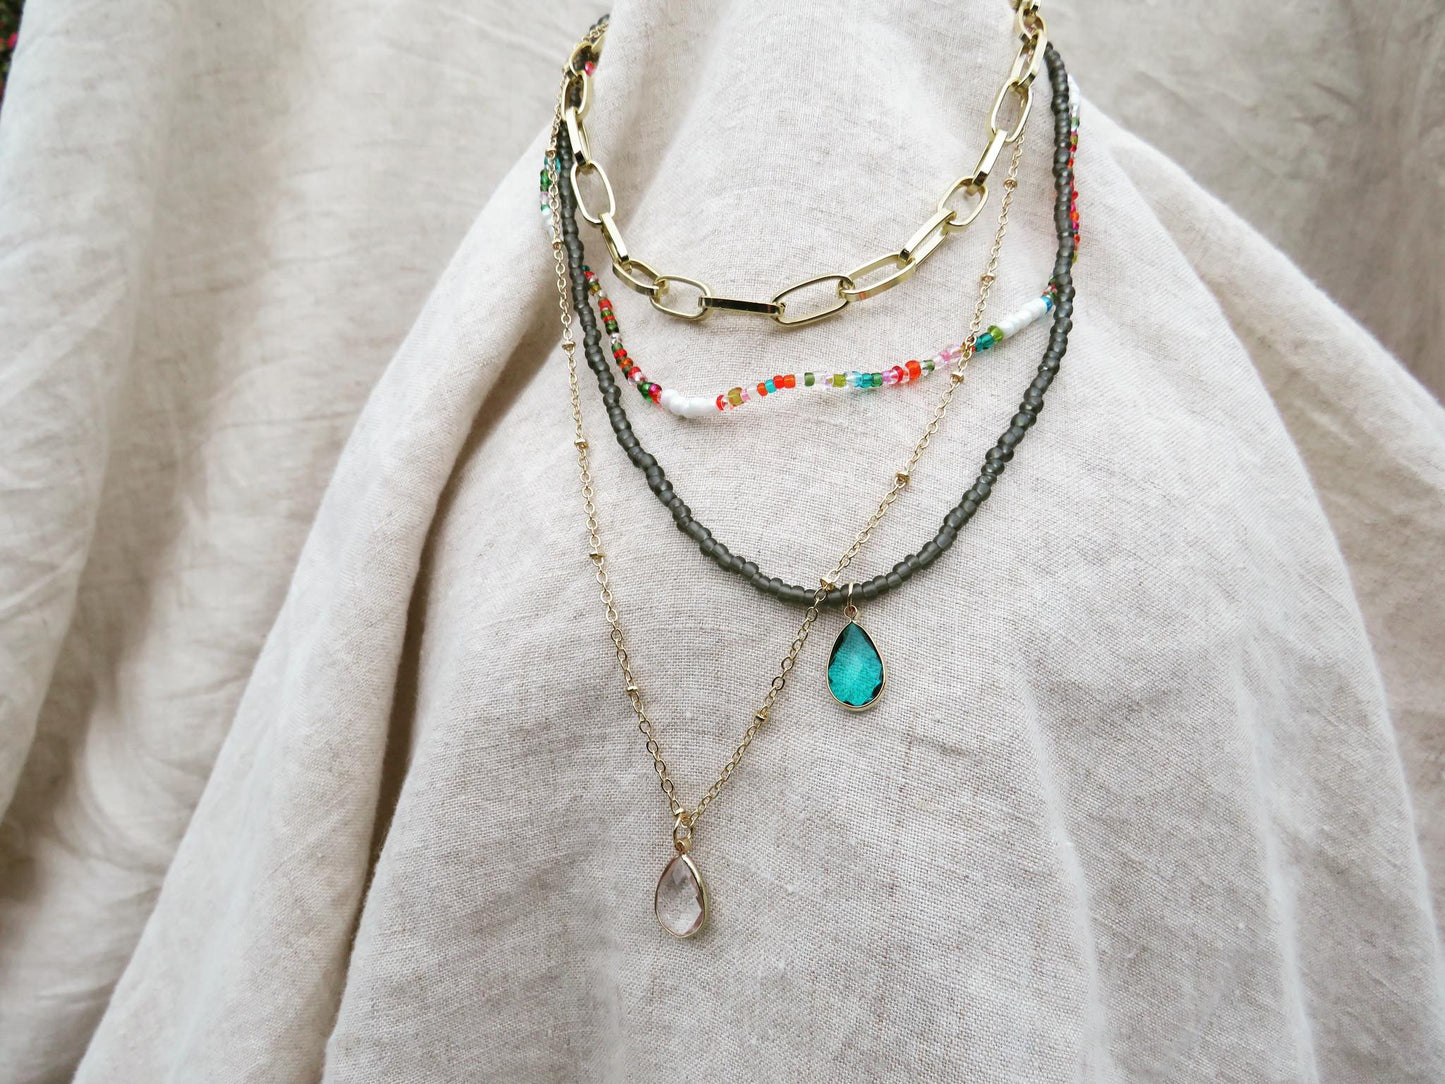 Multilayer Chain, Bead & Pendant Necklace